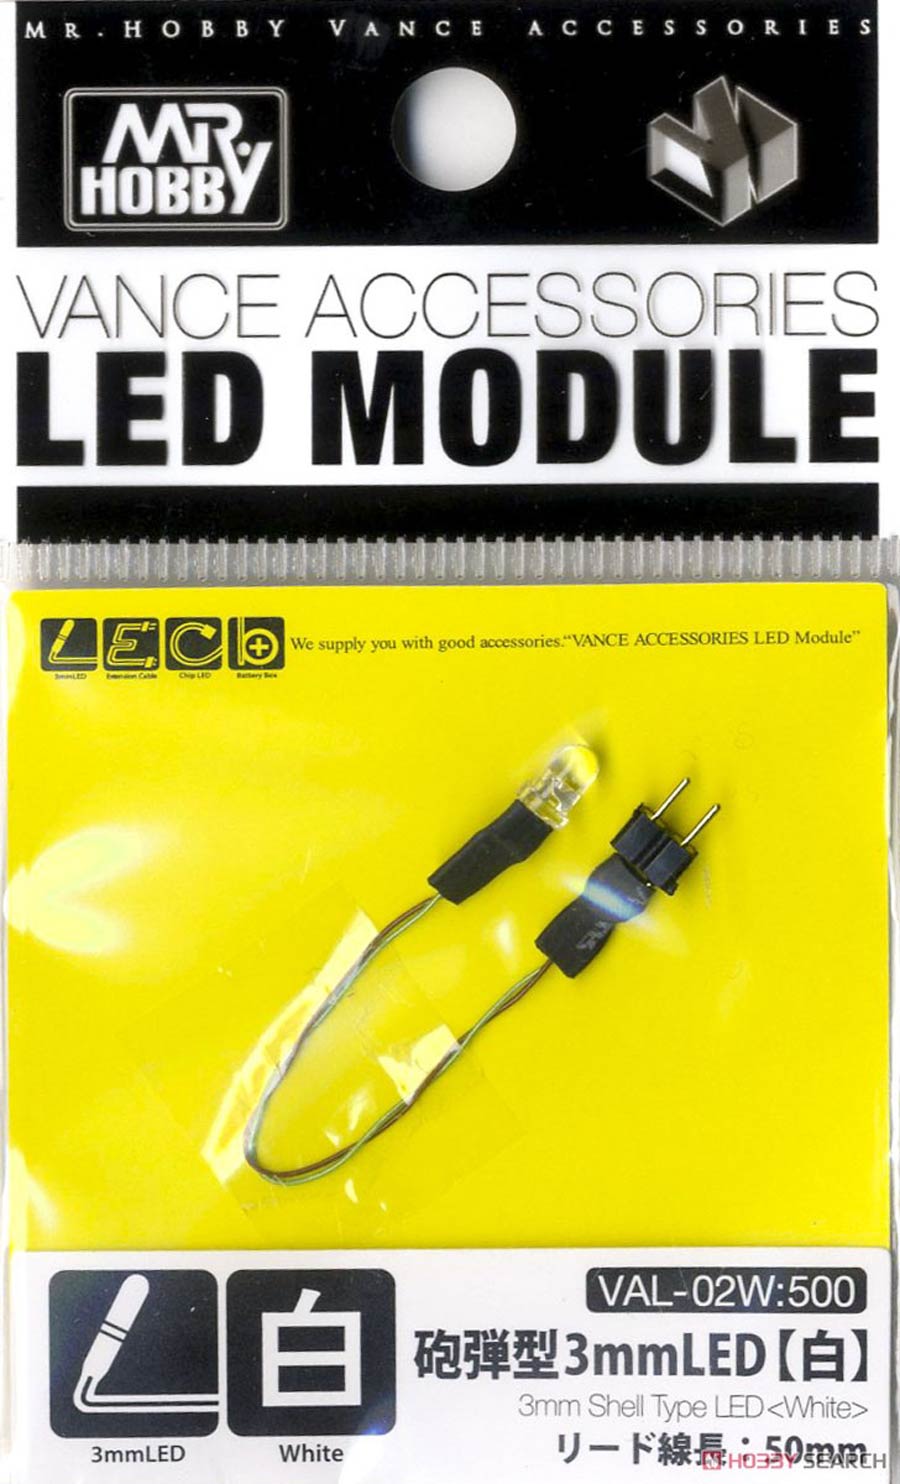 Mr. Hobby Vance Accessories LED Module -  Bag Of 10 Units - 3mm Shell Type LED (White)